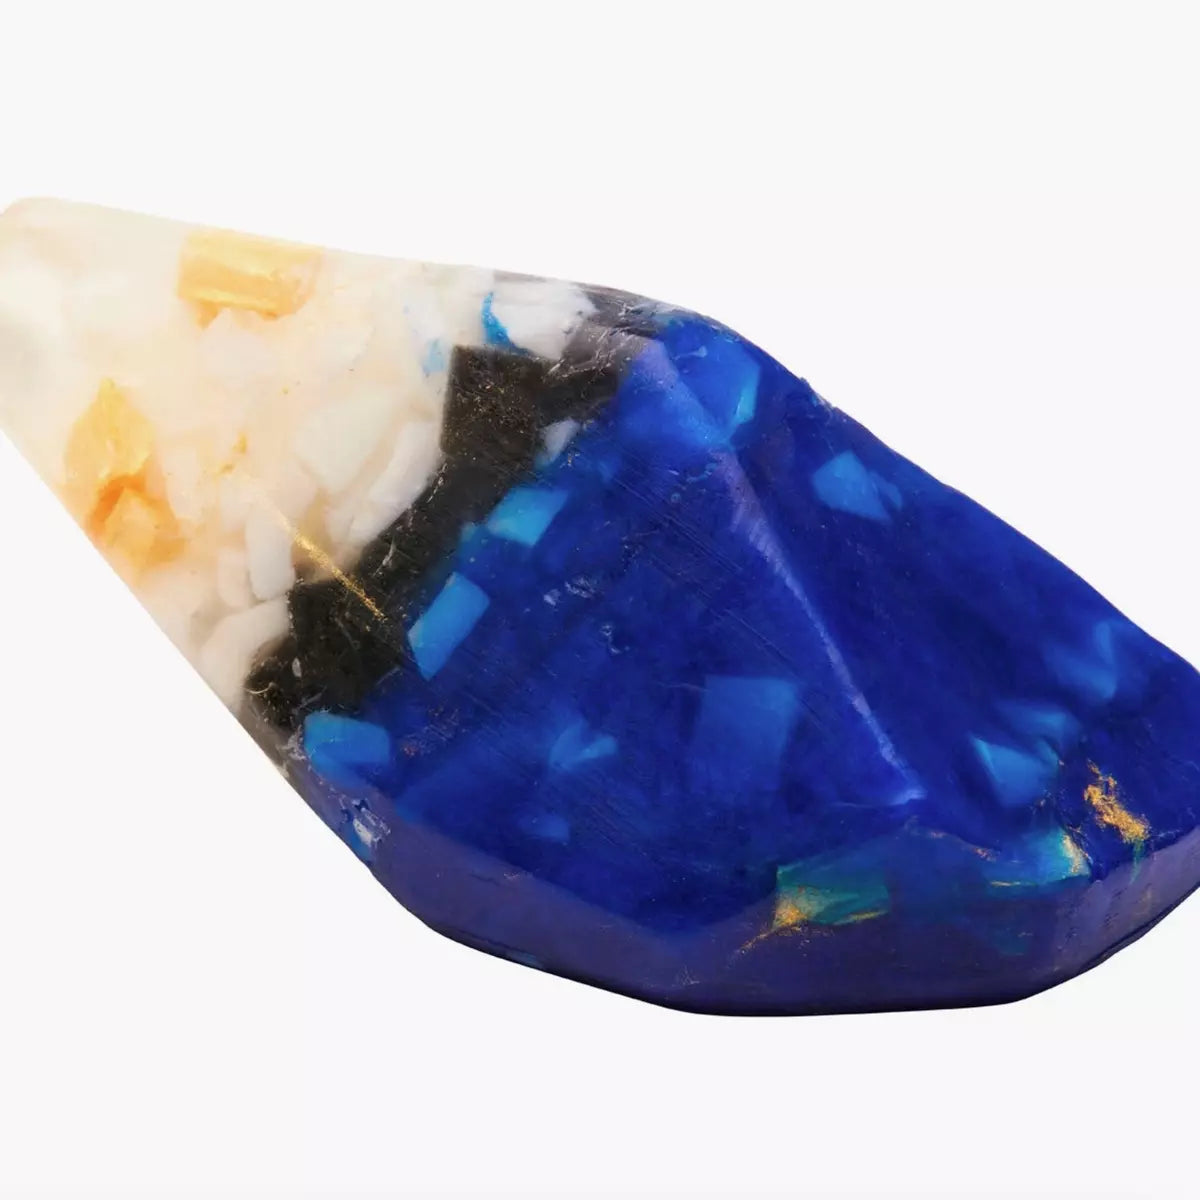 A Crystal Soap - LAPIS LAZULI - Jasmine, Frankincense + Lime from Summer Salt Body, known for its high vibrational energy, adorned in shades of blue and white. A coating of sand accentuates its natural beauty.